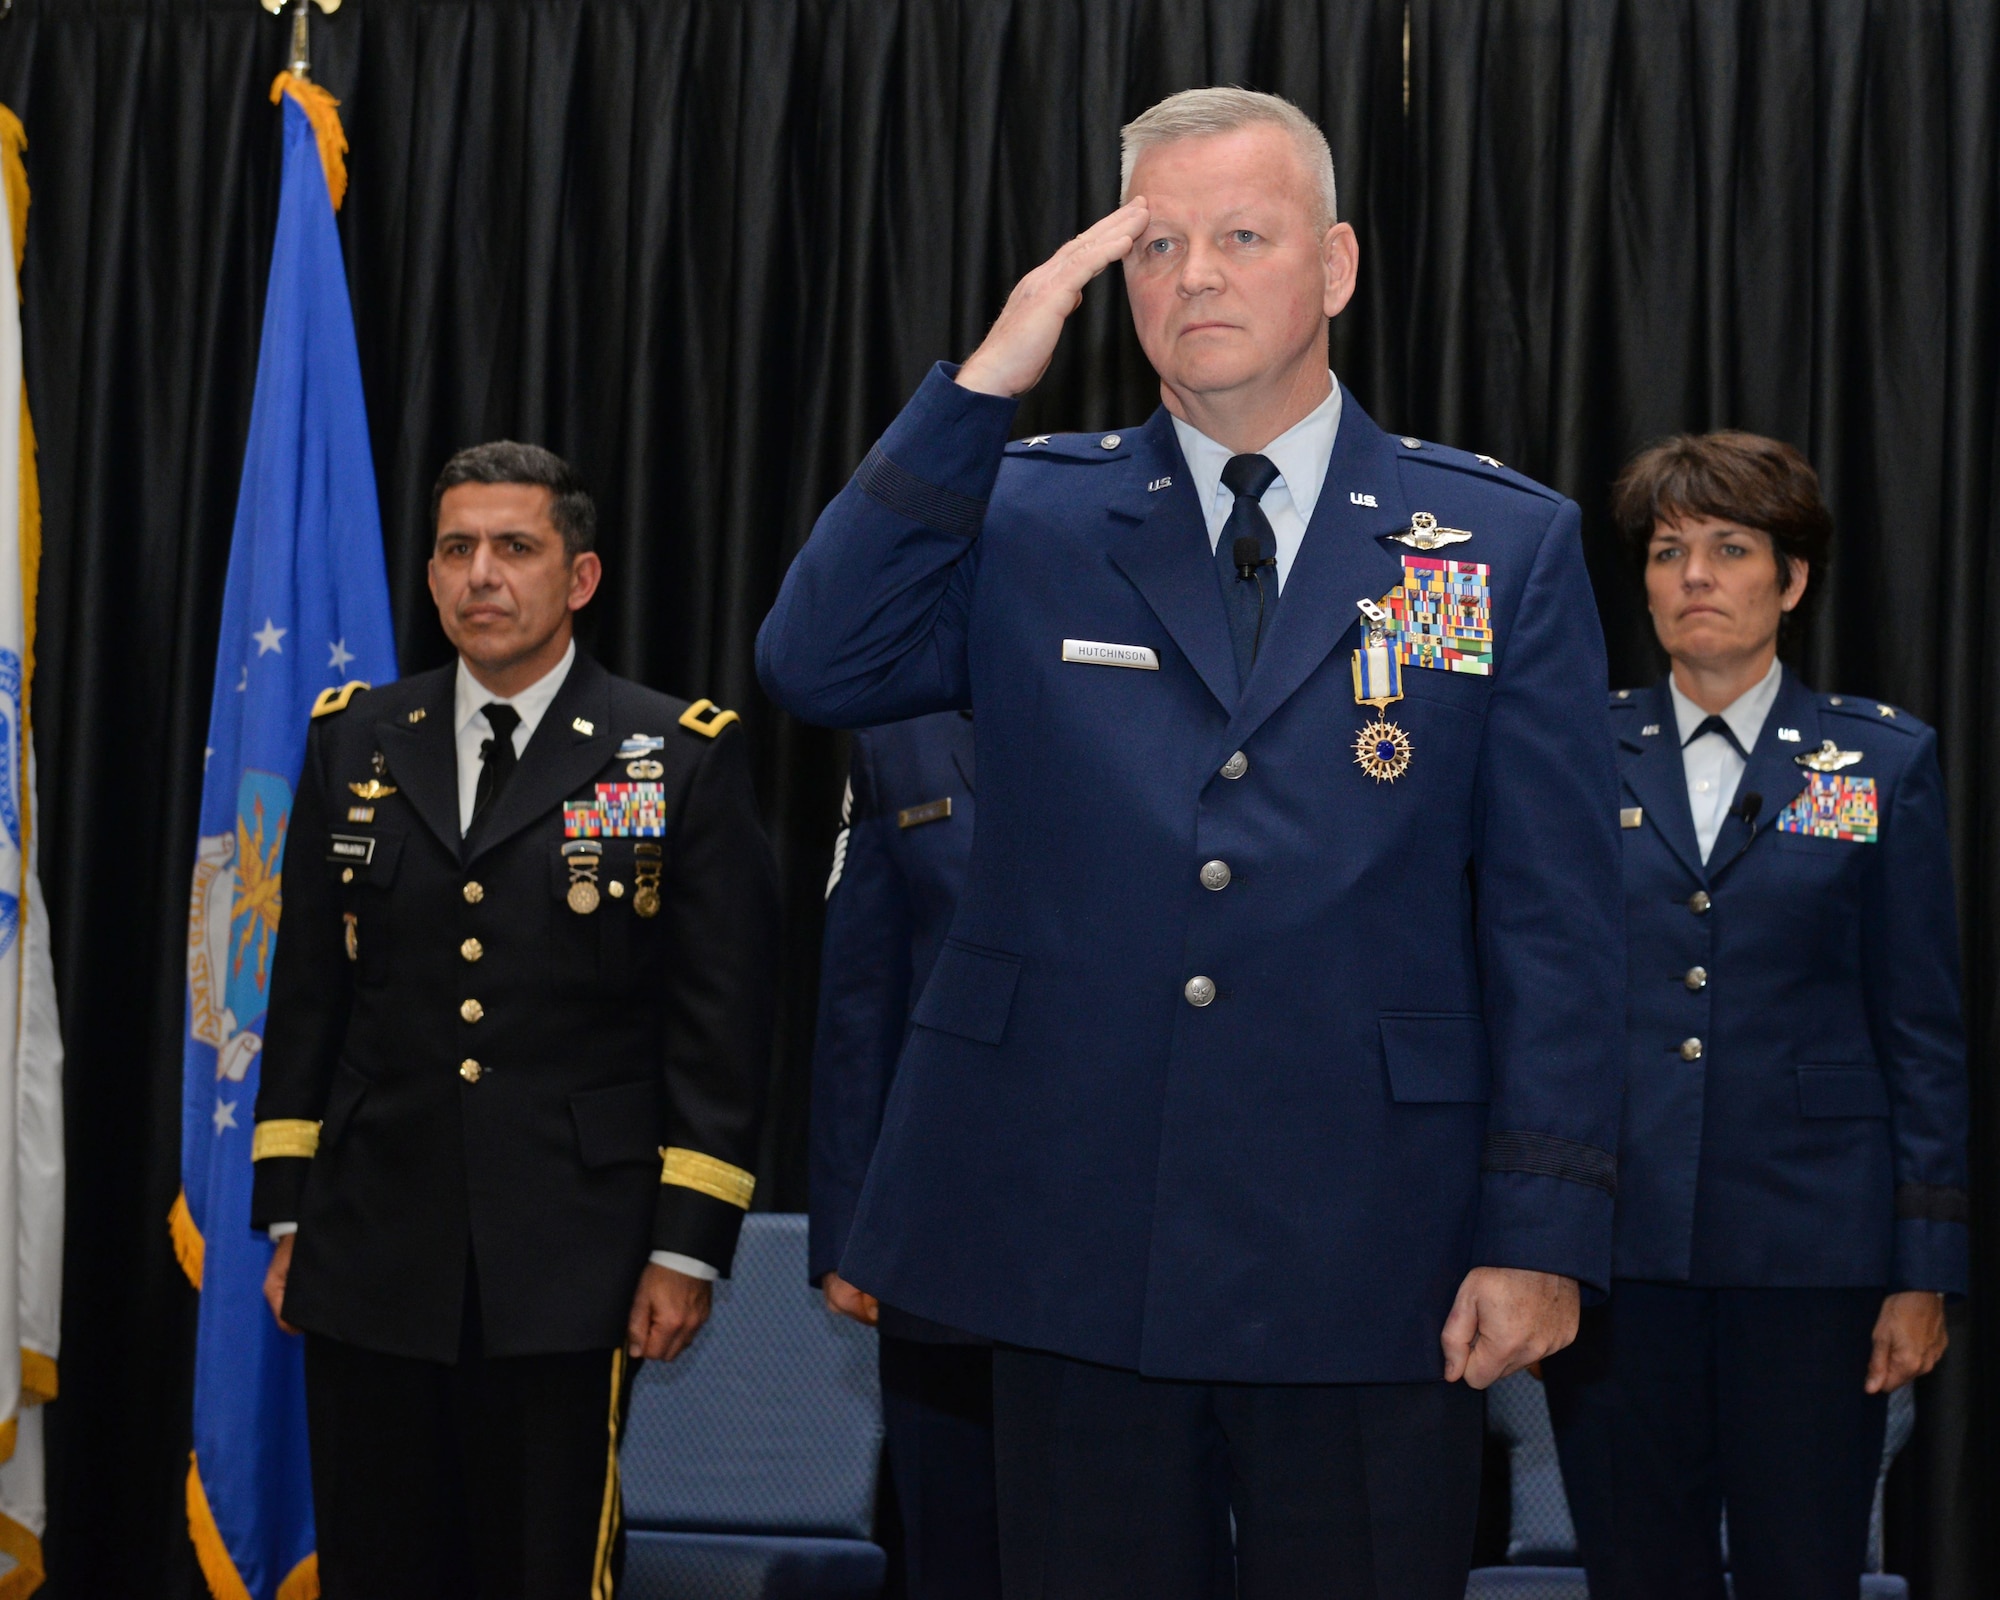 Brig. Gen. Paul N. Hutchinson, the commander New Hampshire Air National Guard renders a final salute during his retirement ceremony, at Pease Air National Guard Base, N.H., Jan. 6, 2017.  Hutchinson also served as the assistant adjutant general-air, New Hampshire ANG.  (N.H. Air National Guard photo by Staff Sgt. Curtis J. Lenz)